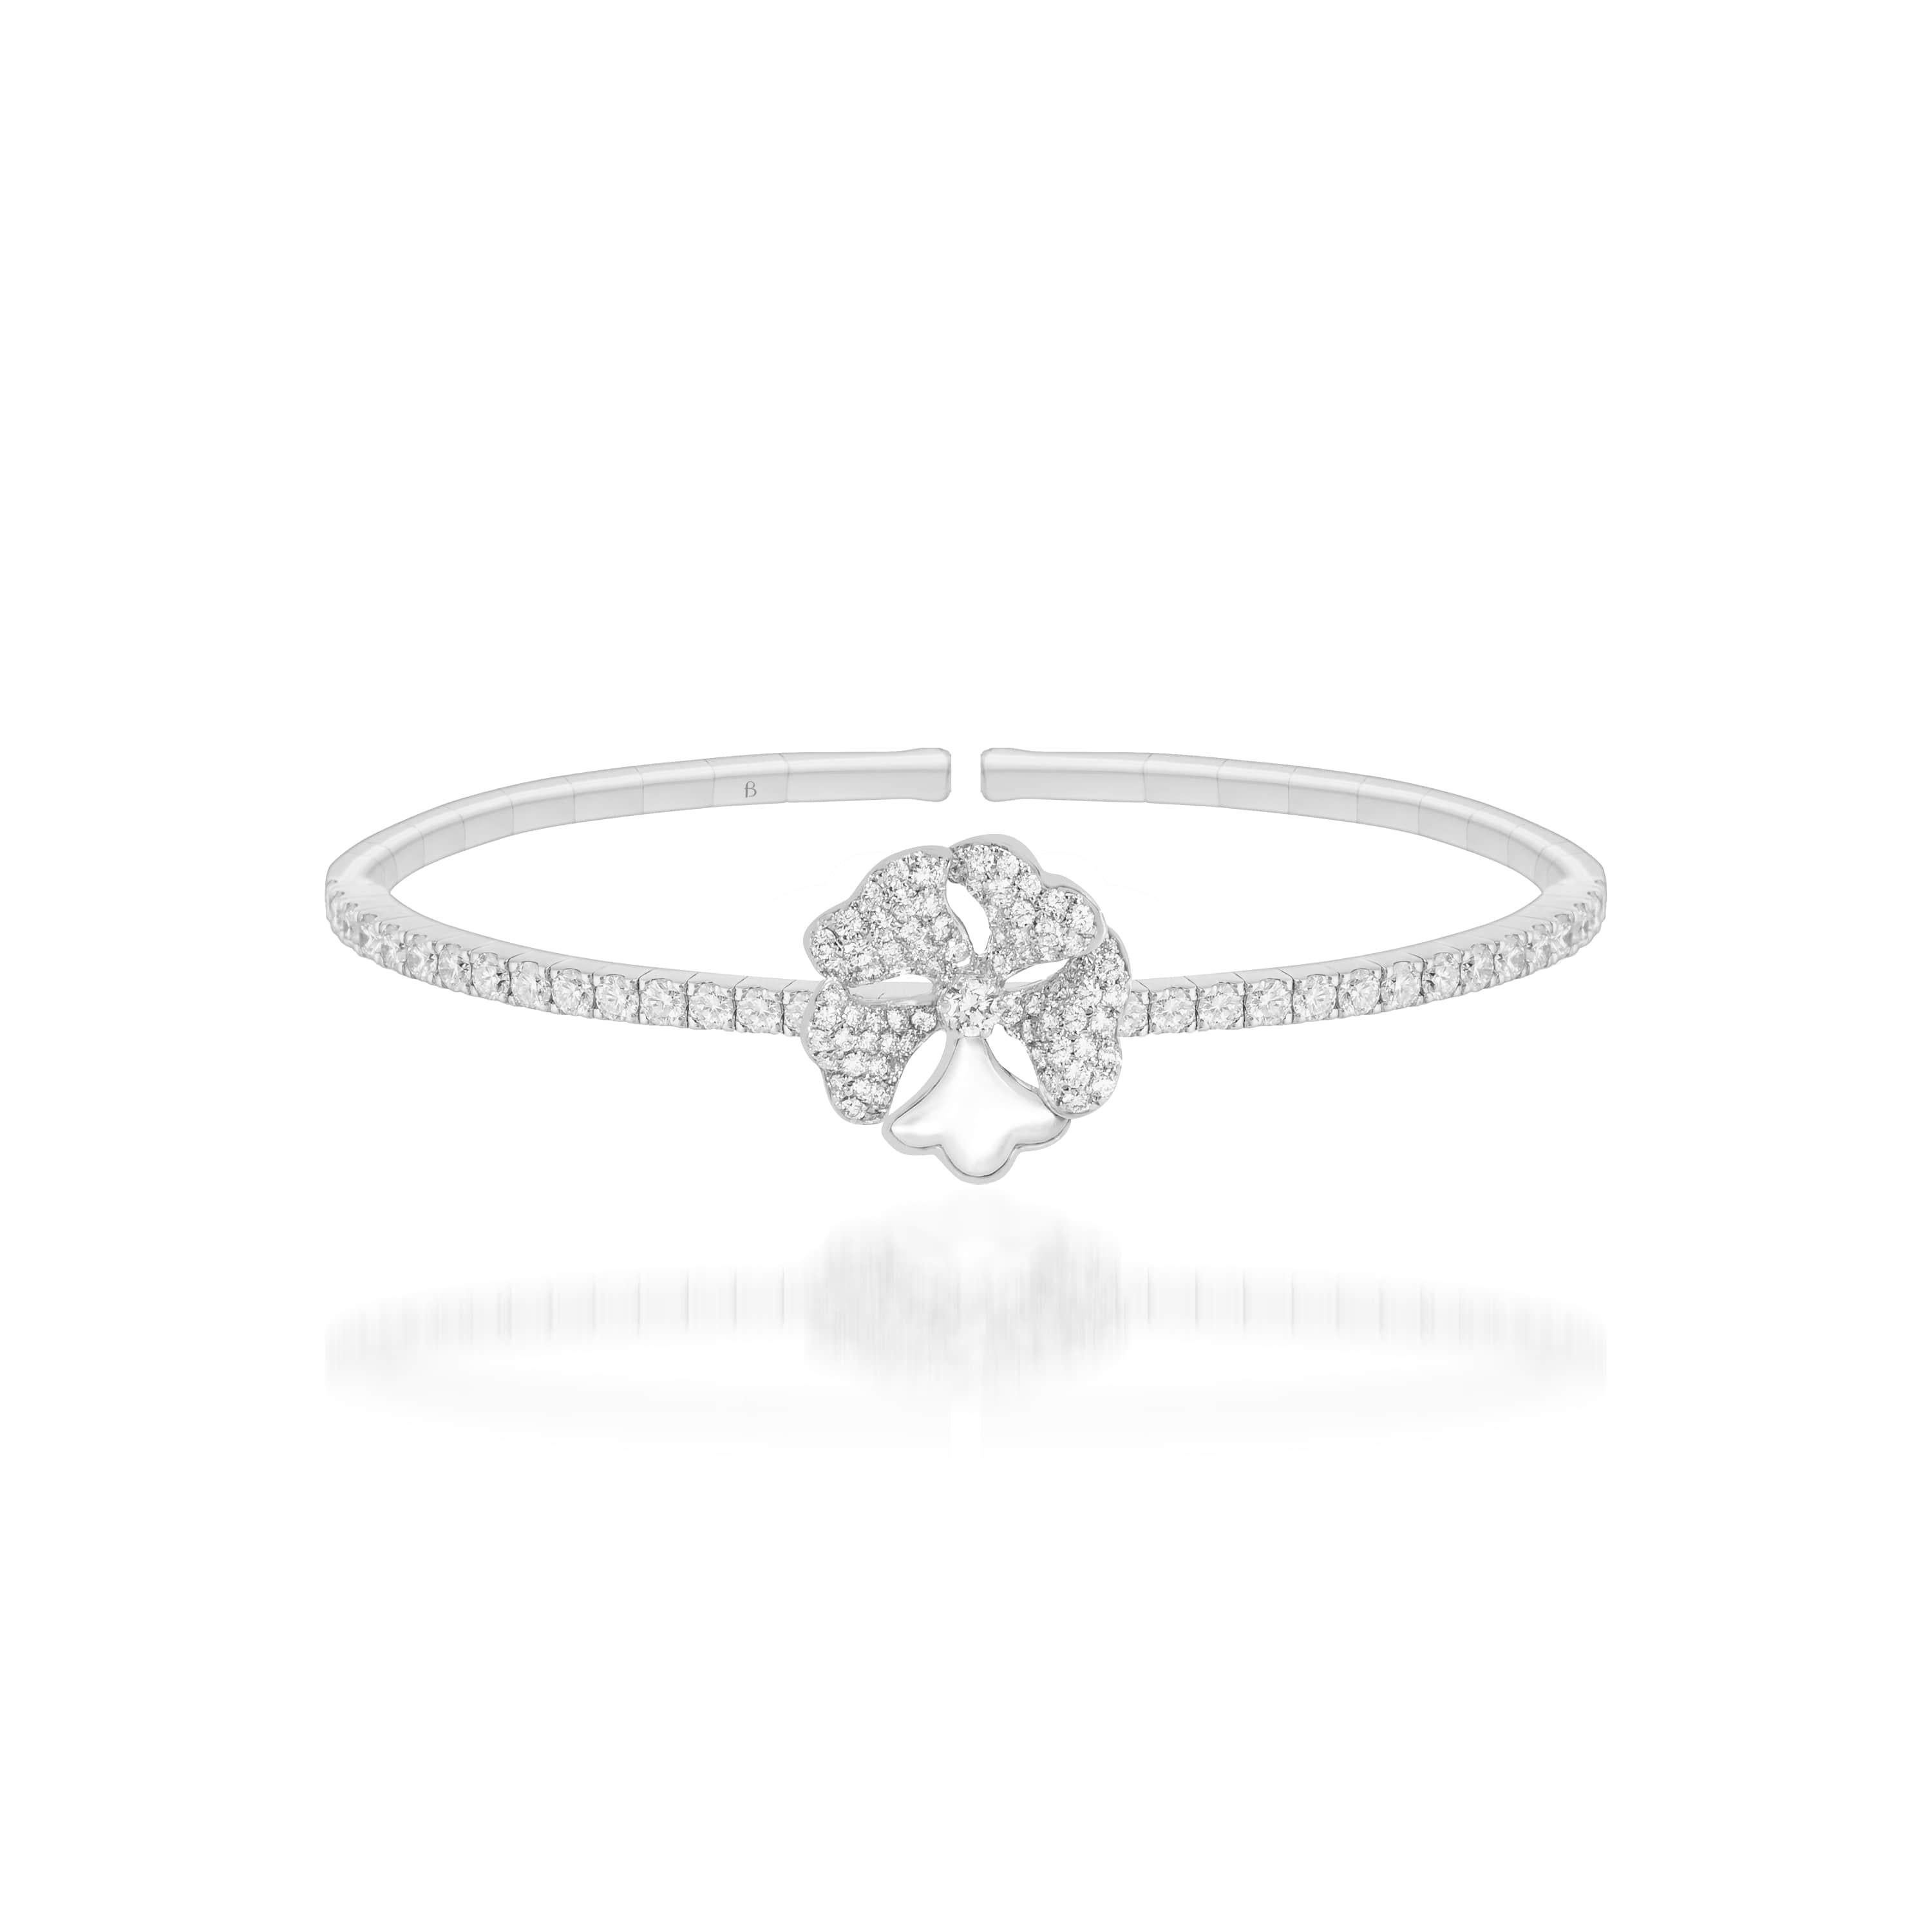 Bloom Diamond and White Mother-of-Pearl Solo Flower Bangle in 18K White Gold

Inspired by the exquisite petals of the alpine cinquefoil flower, the Bloom collection combines the richness of diamonds and precious metals with the light versatility of